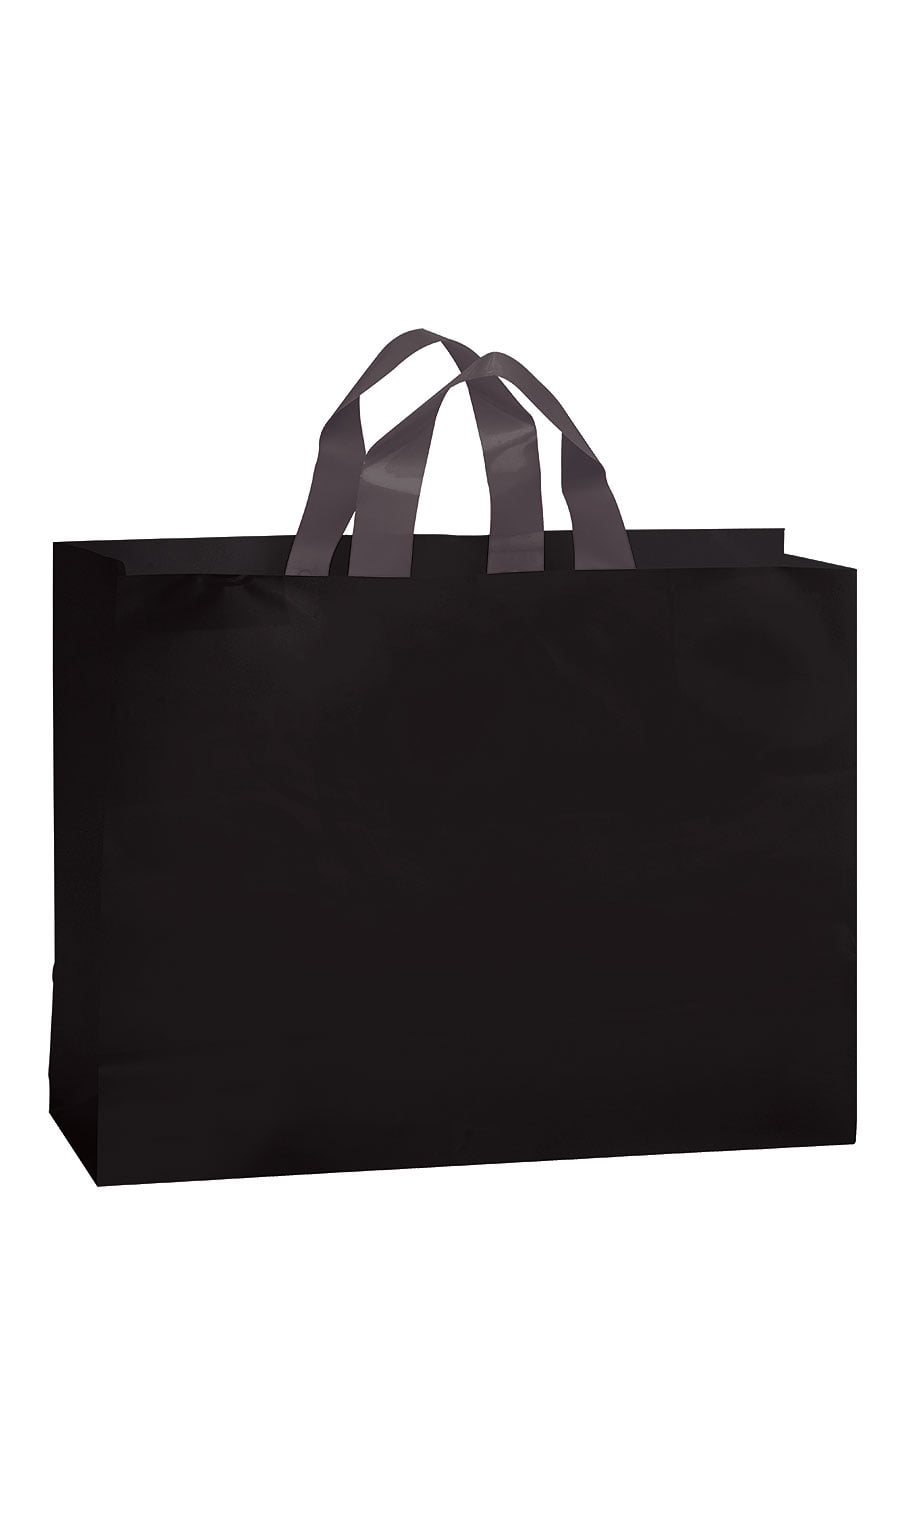 Frosty Plastic Bags Shopping Black Frosted 16" x 6 x 12" 100 Gift Merchandise 